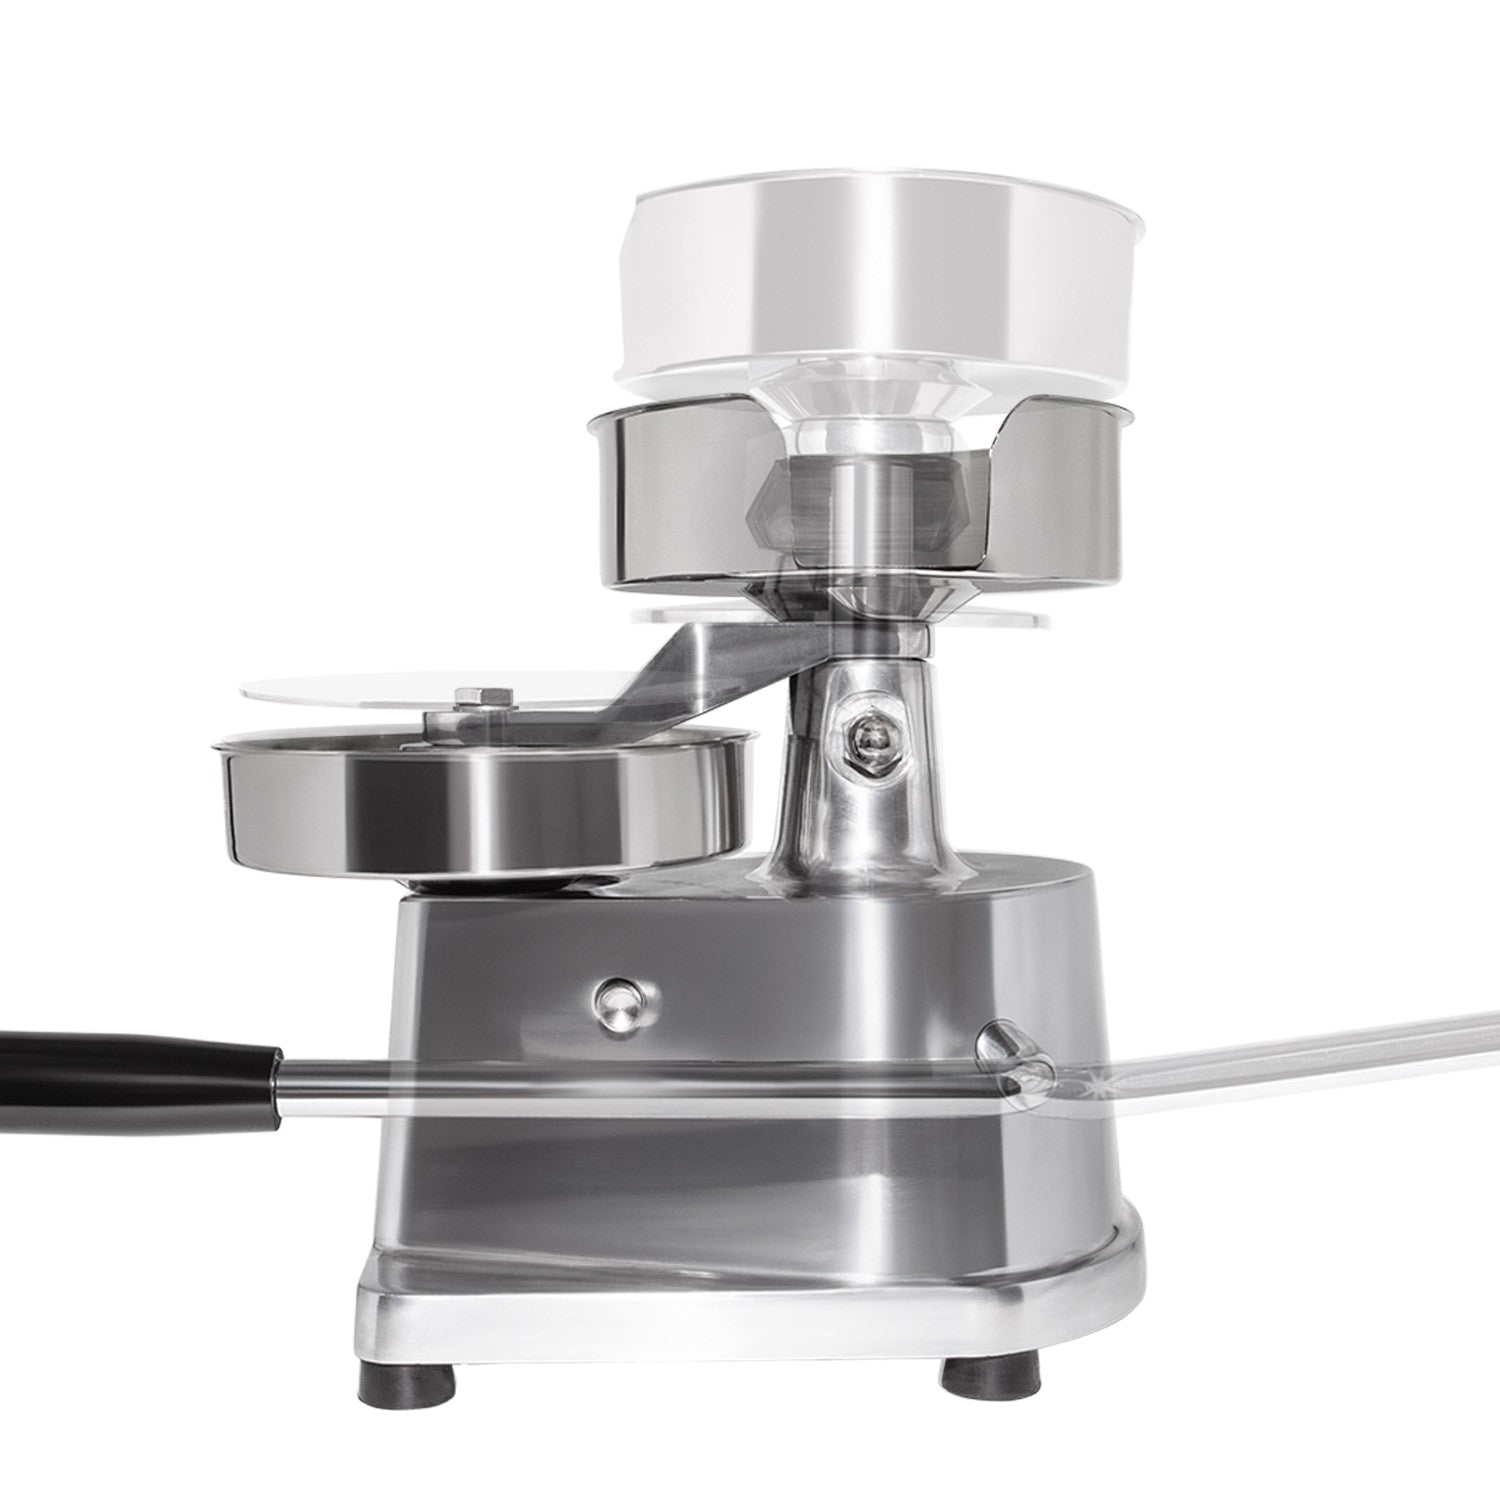 A-A100 Burger Press | Hamburger Patty Maker | Commercial Meat Forming Tool | Stainless Steel | 4” Diameter